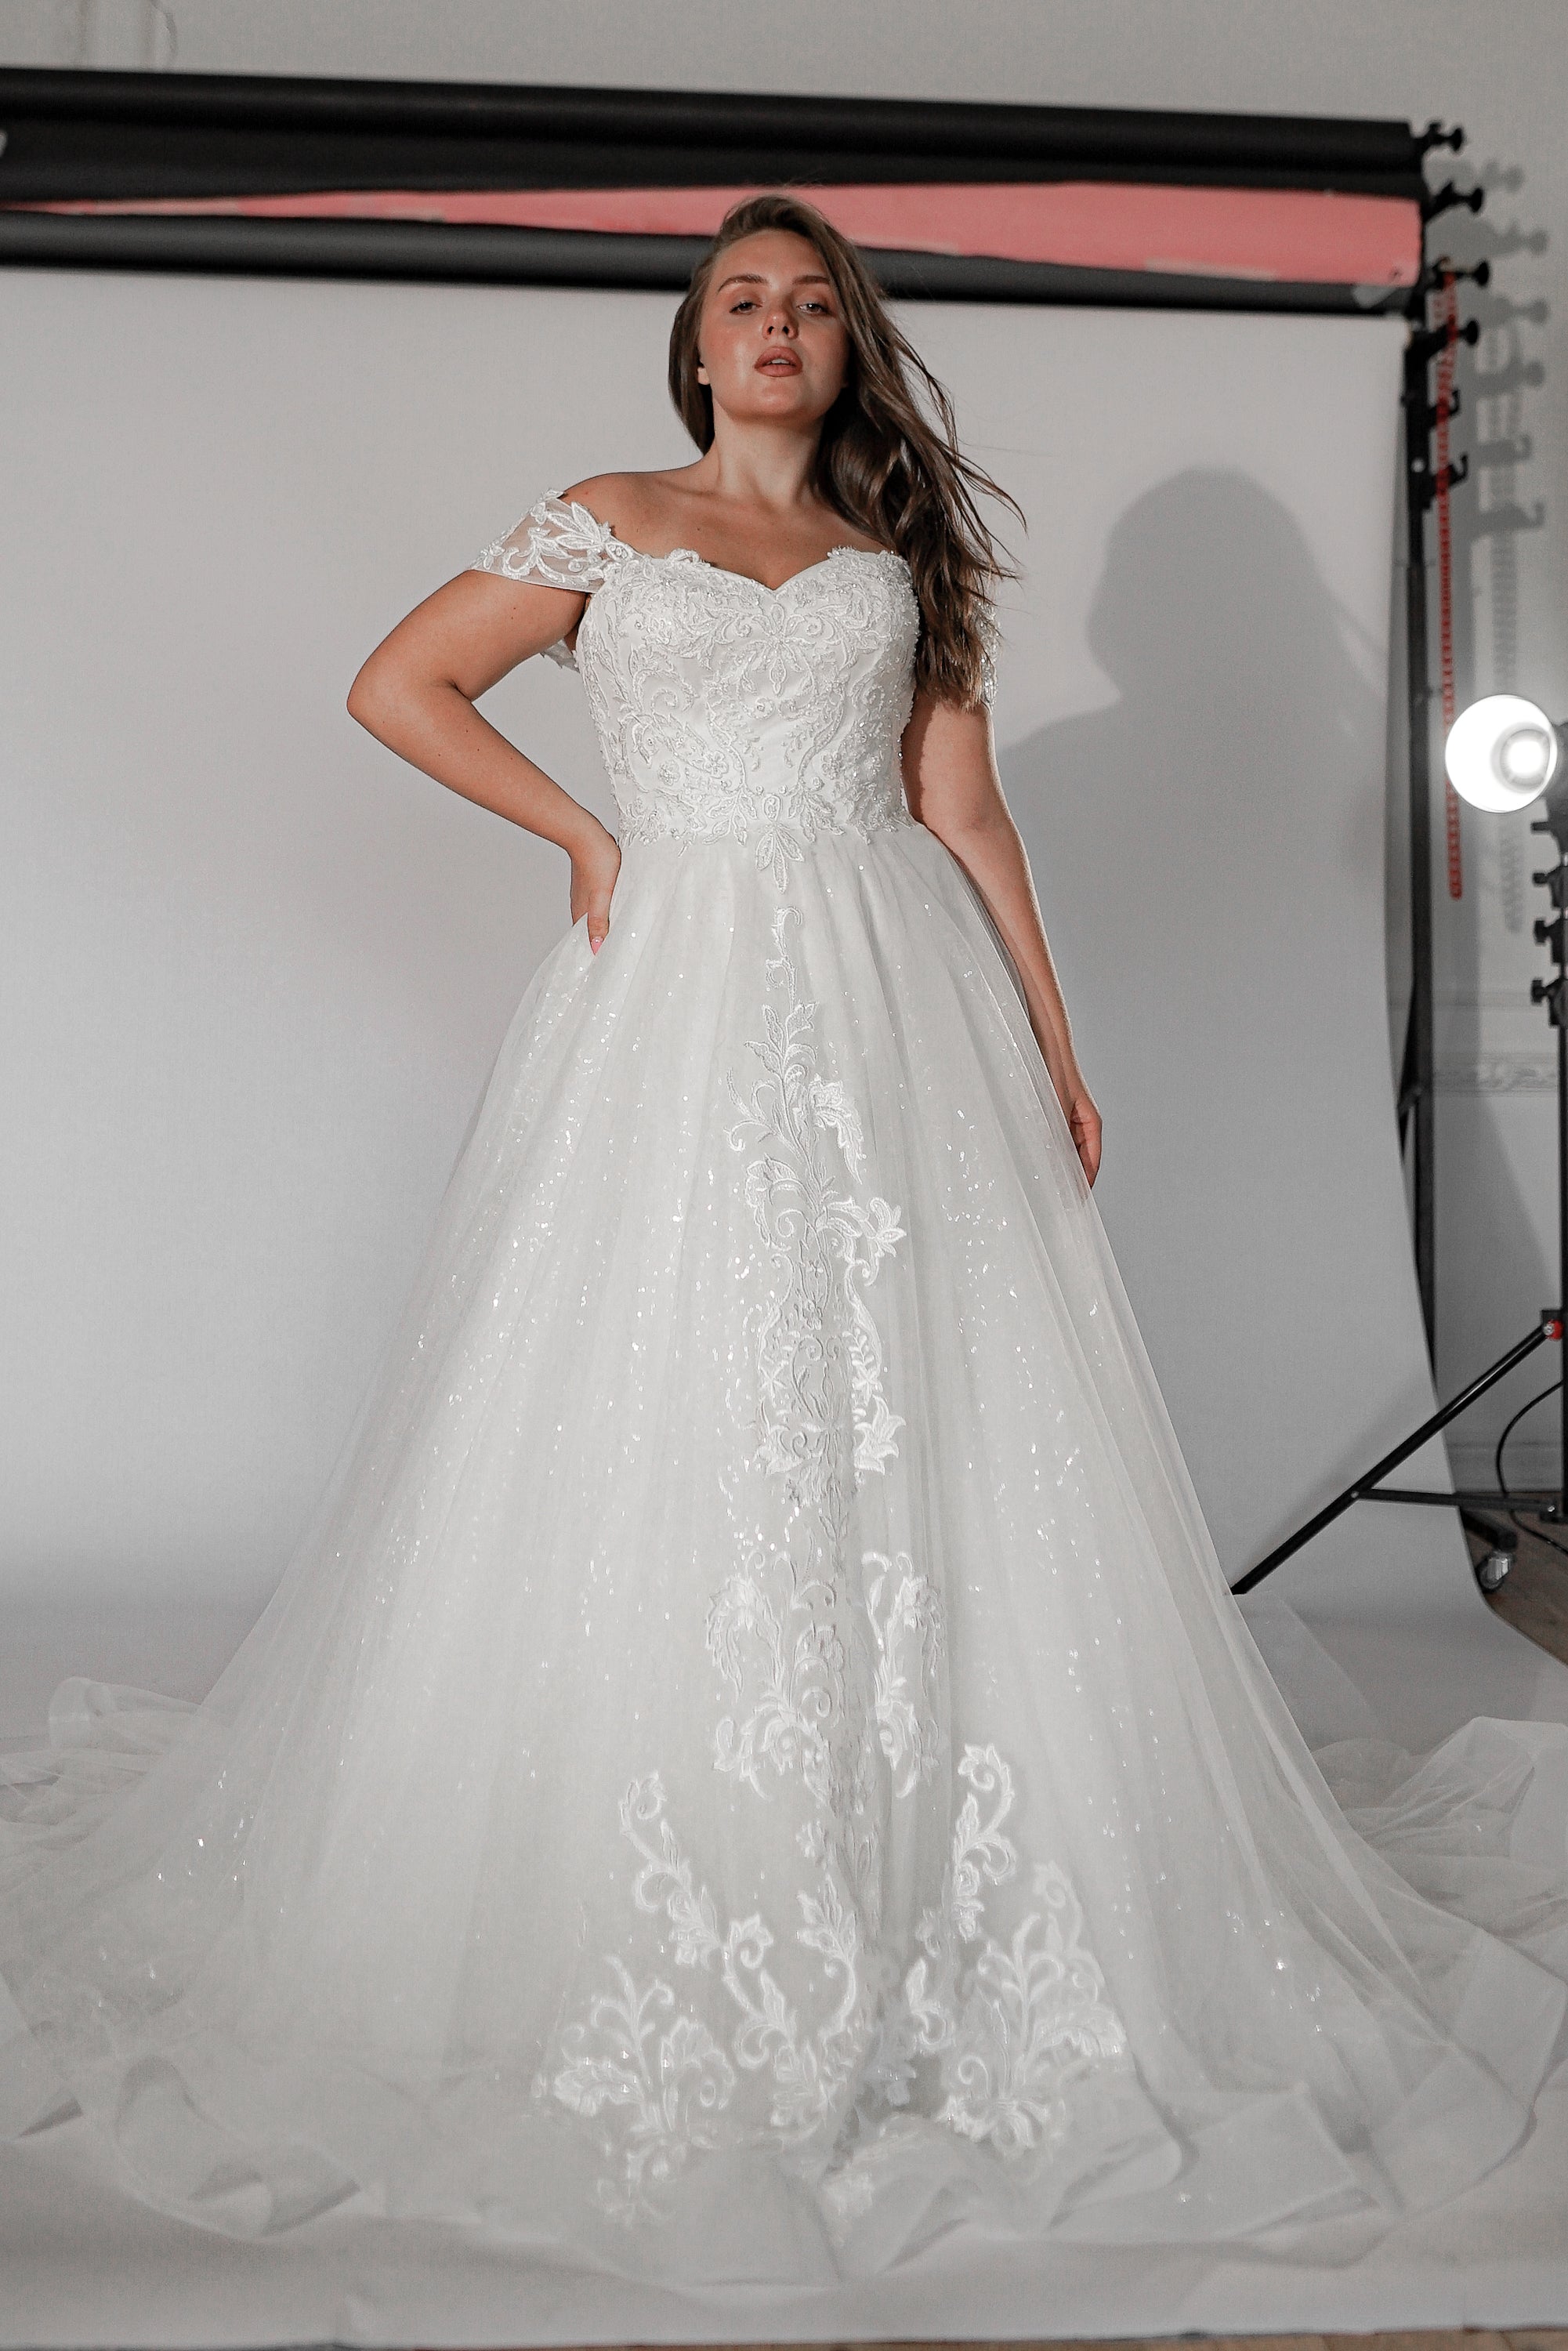 Vintage 3D Flower Lace Ballgown Champagne Wedding Dress With Sheer Neckline  And Tulle Overlay 2022 Collection In Champagne And Ivory BC10687 From  Cinderelladress, $182.35 | DHgate.Com